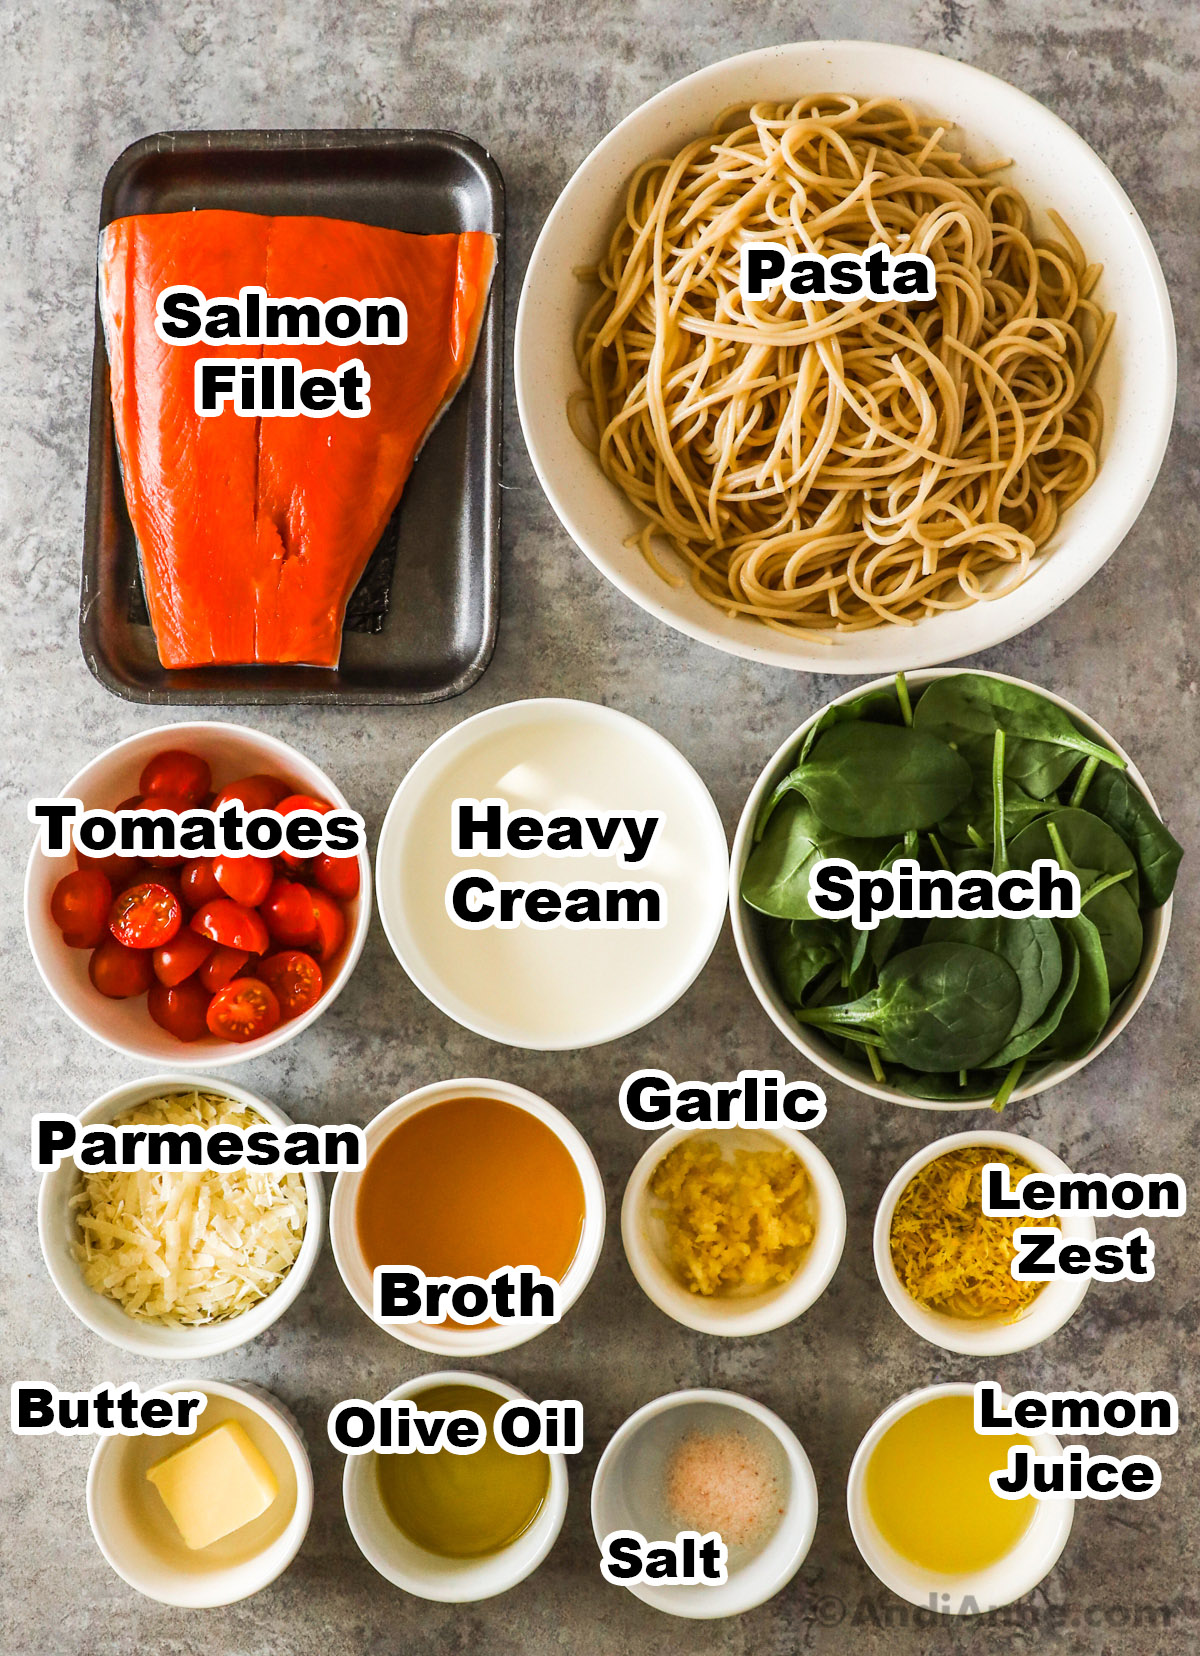 Recipe ingredients including a salmon fillet, bowl of cooked pasta, sliced cherry tomatoes, heavy cream, spinach, grated parmesan, broth, garlic, lemon zest, butter, olive oil, salt and lemon juice.